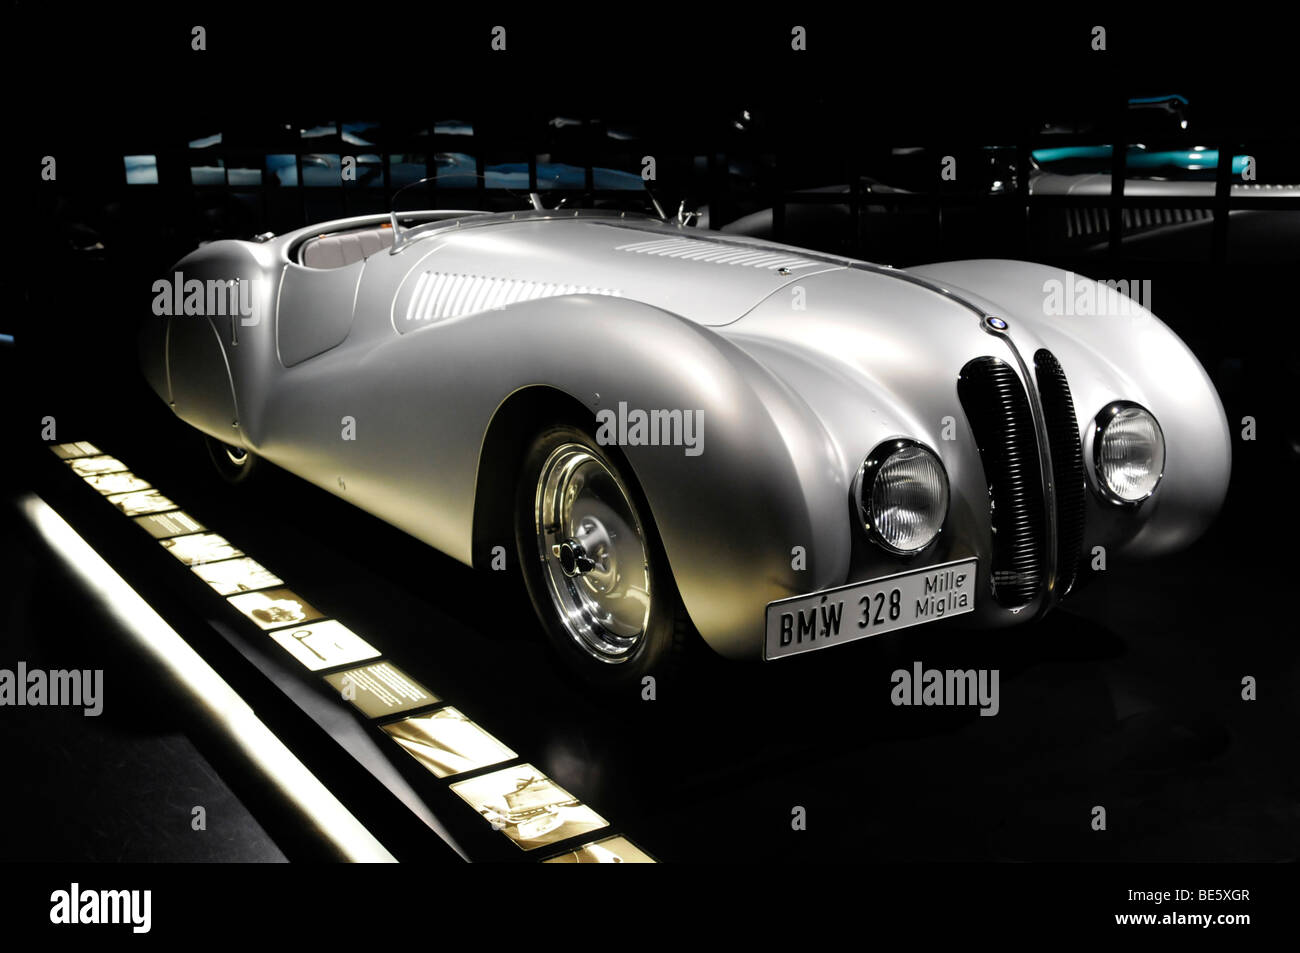 BMW 328 Mille Miglia Roadster, BMW Museum, Munich, Bavaria, Germany, Europe Banque D'Images